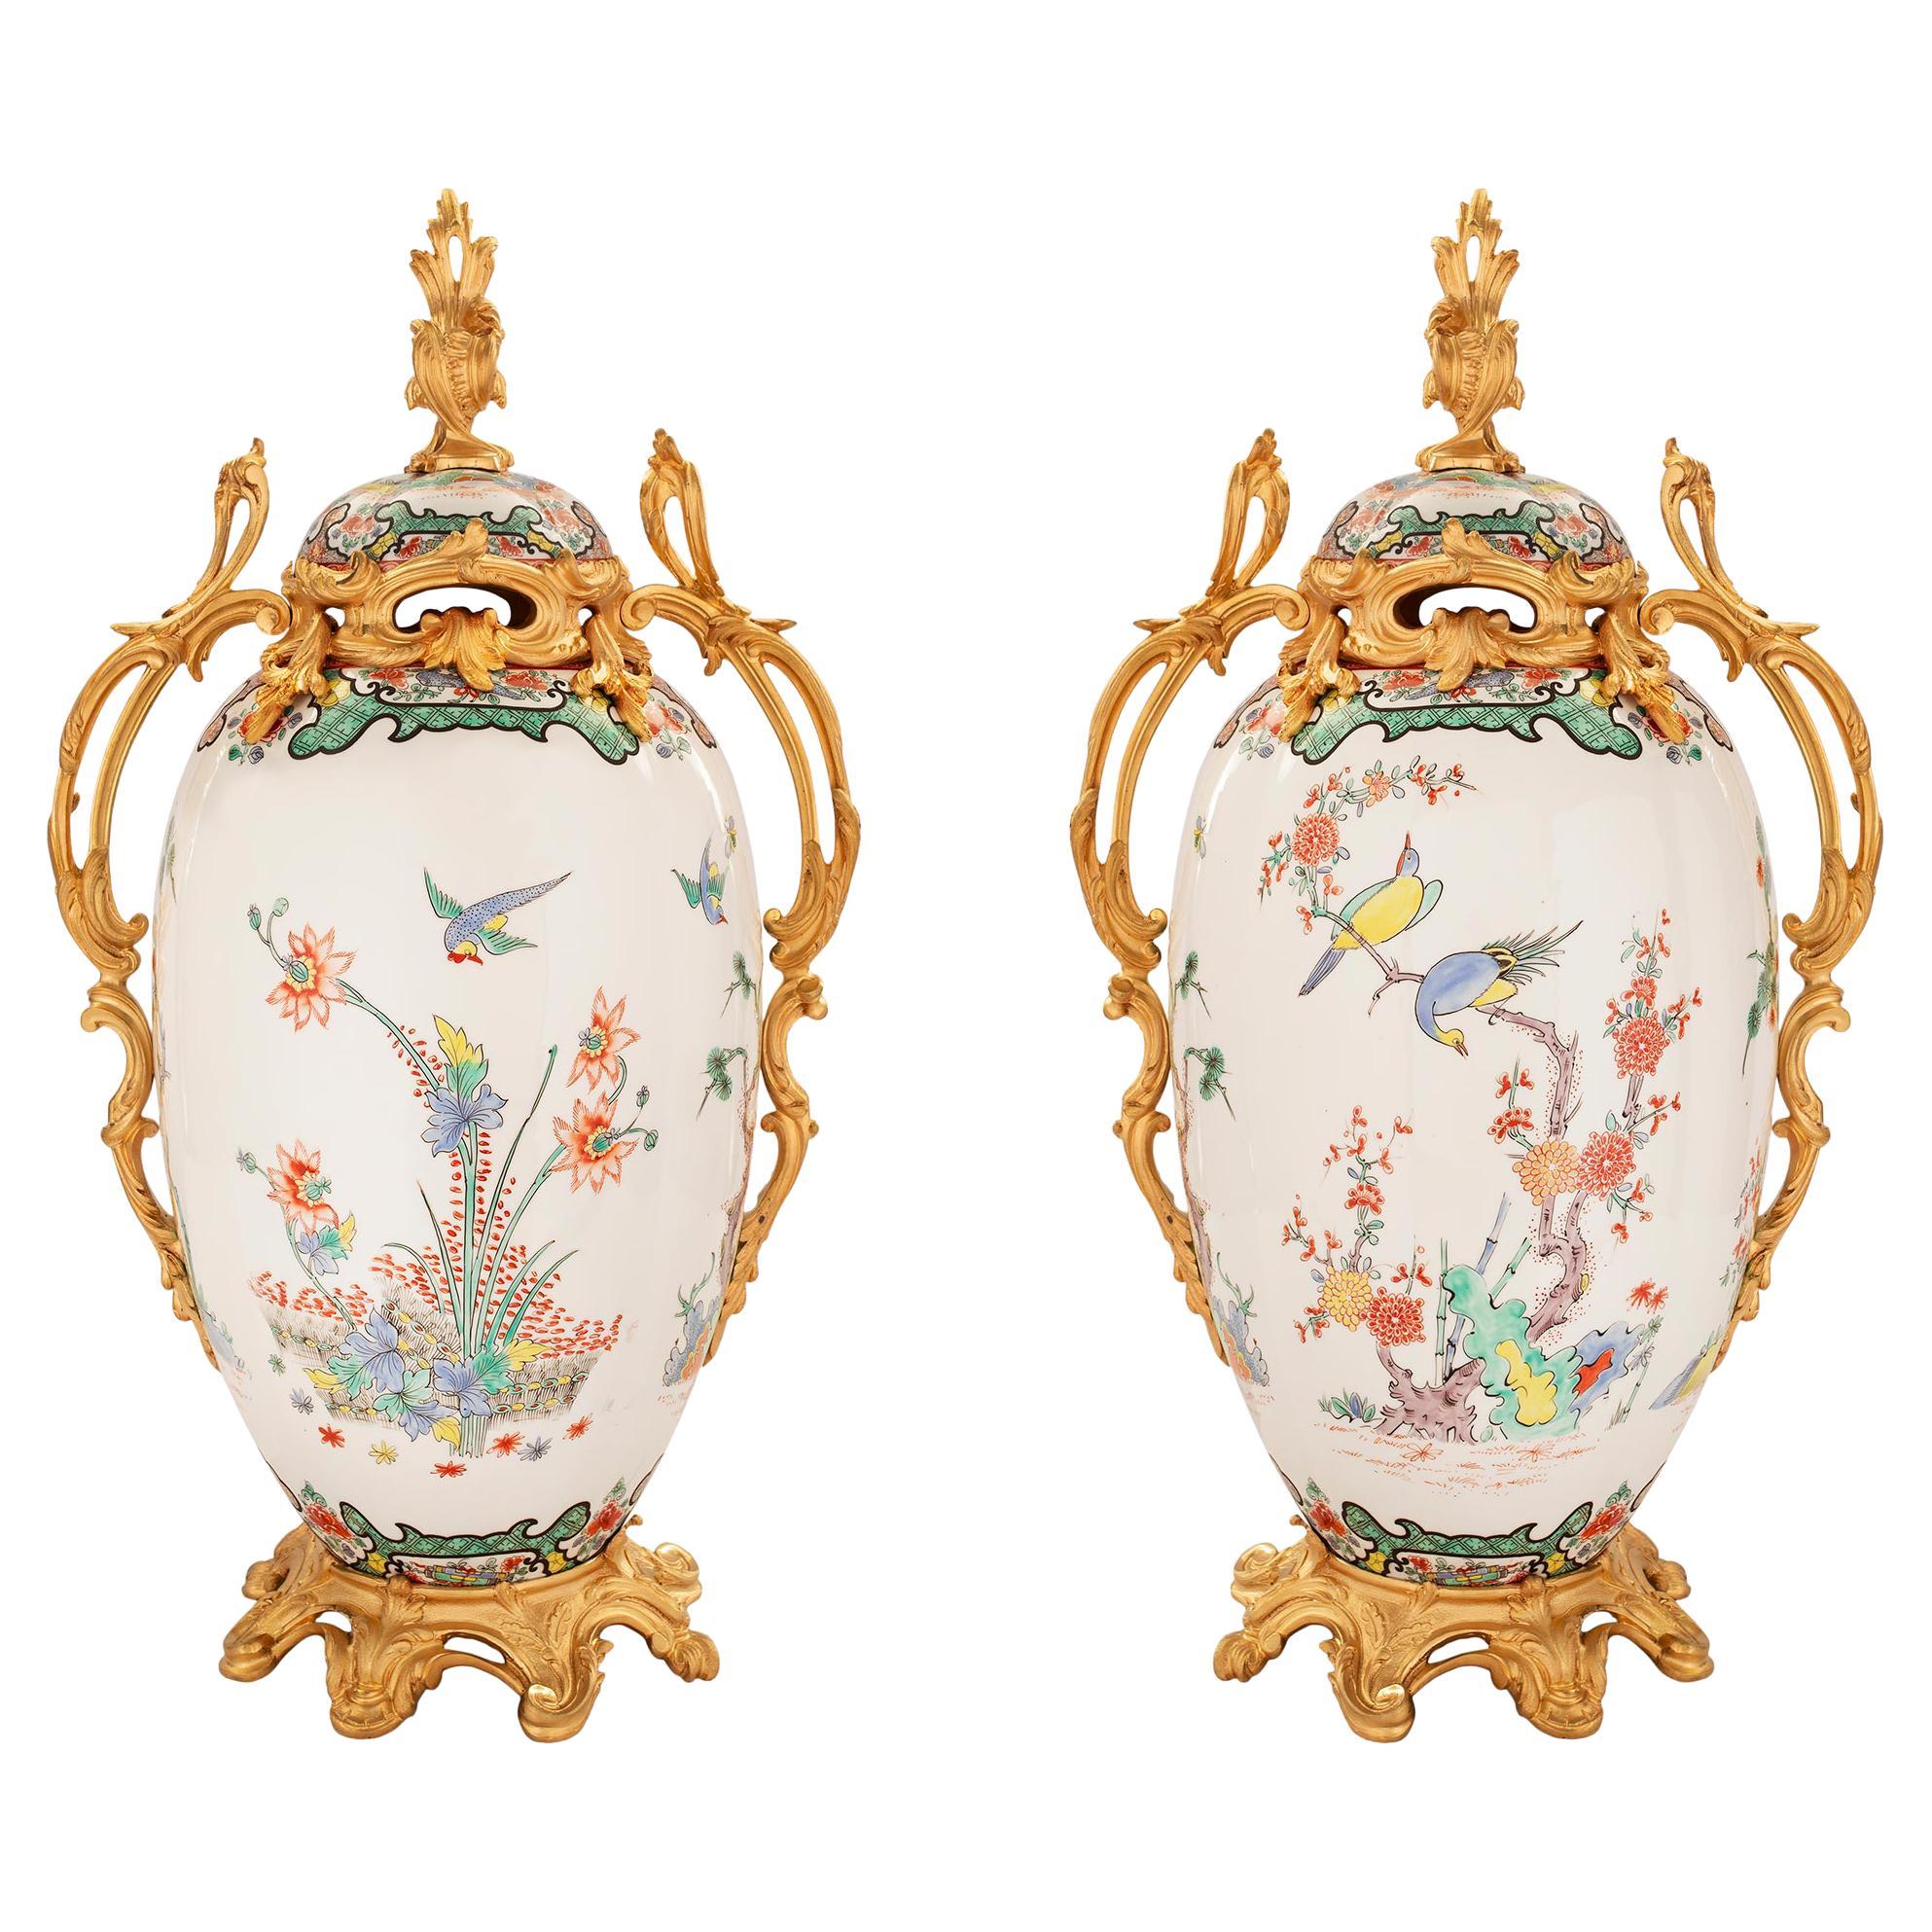 Pair of French 19th Century Louis XV St. Porcelain & Ormolu Mounted Lidded Urns